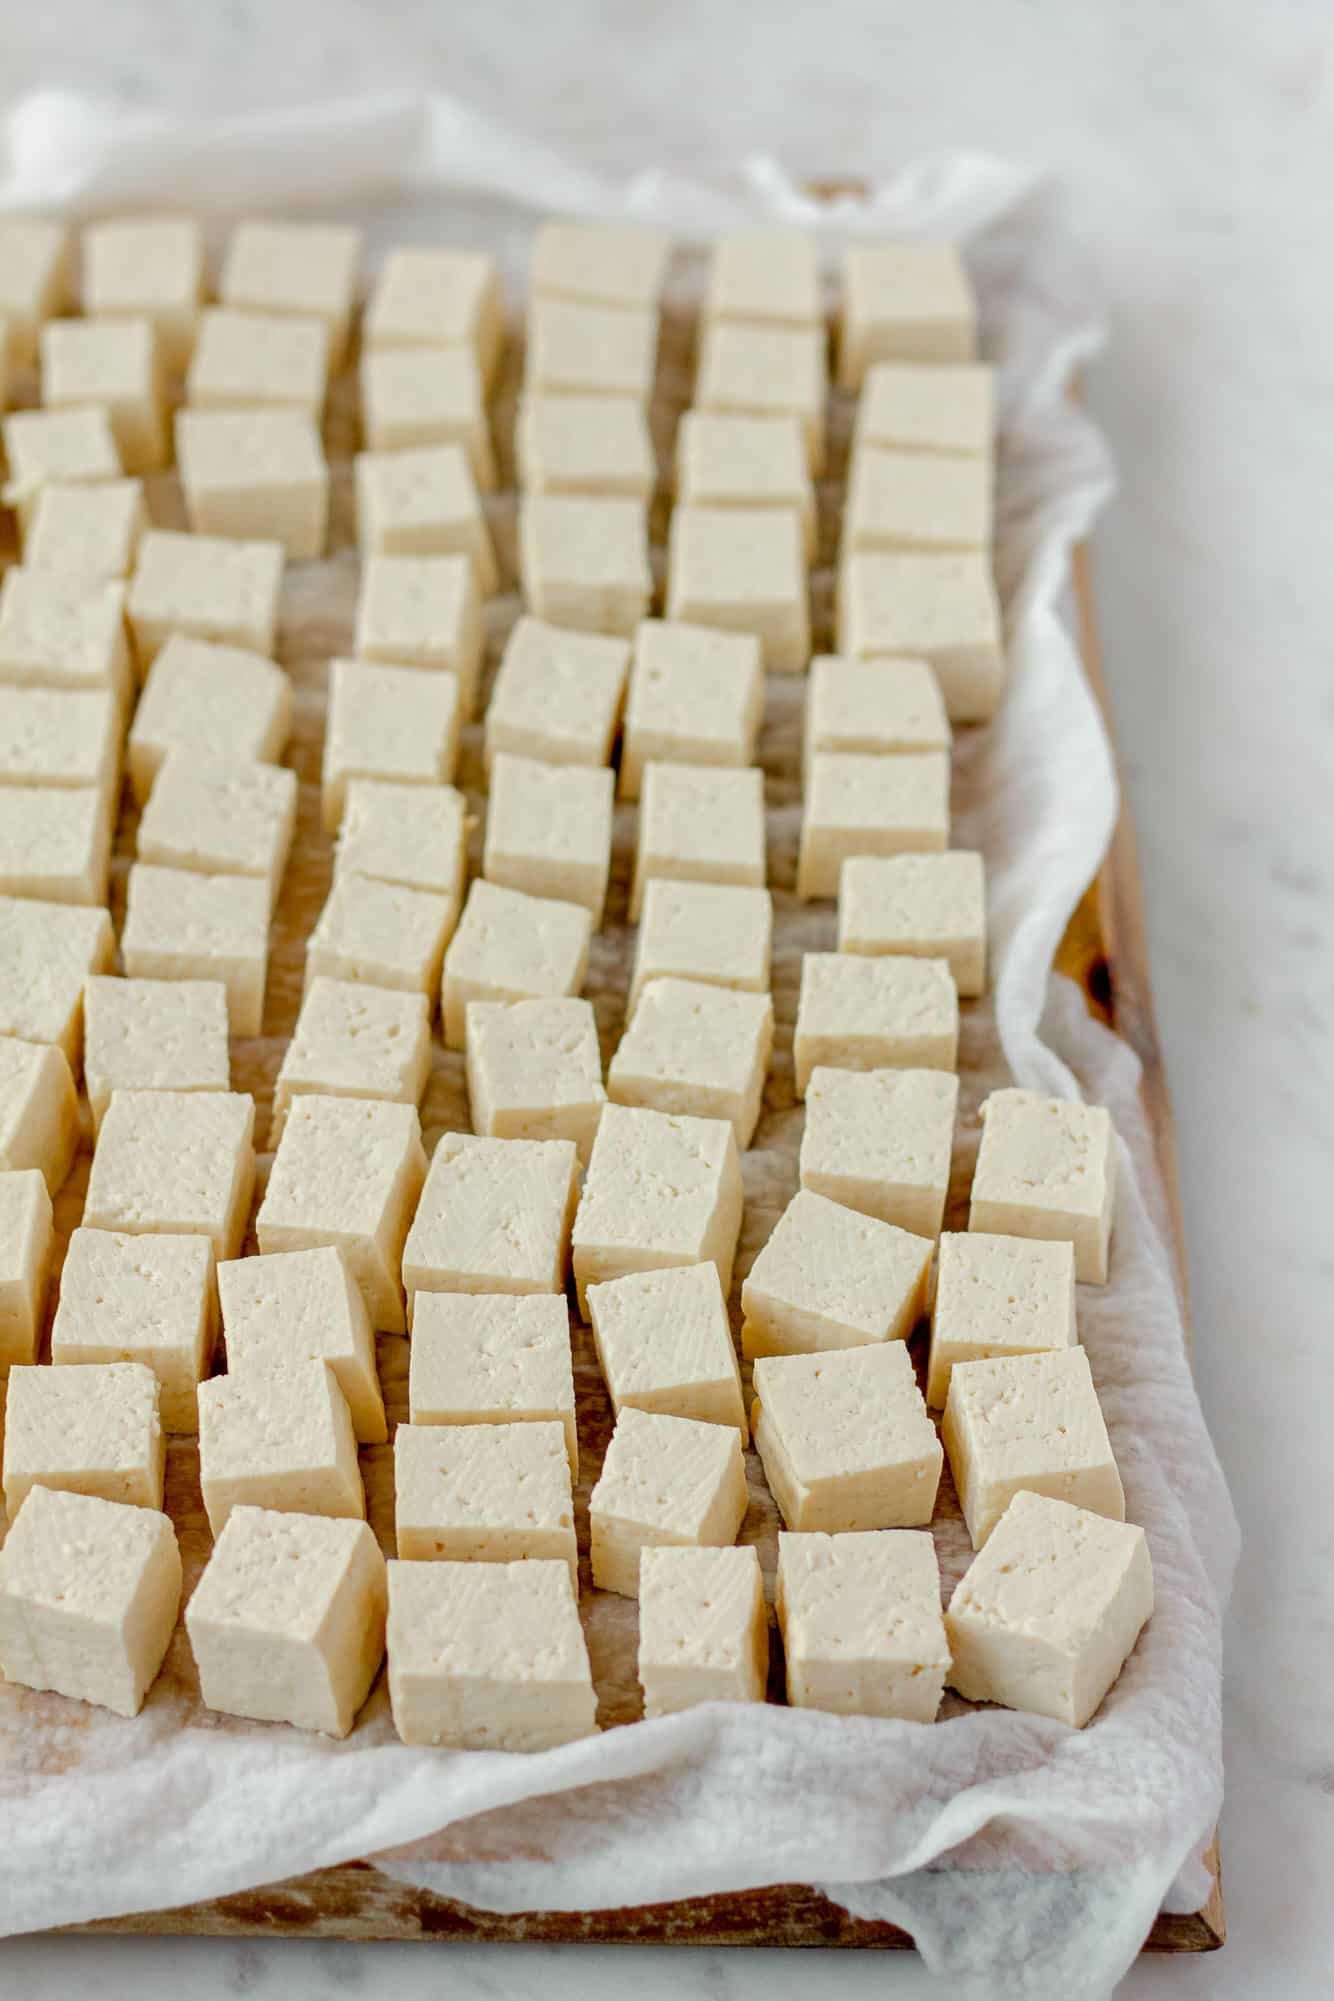 rows of tofu cubes on a paper towel-lined cutting board.